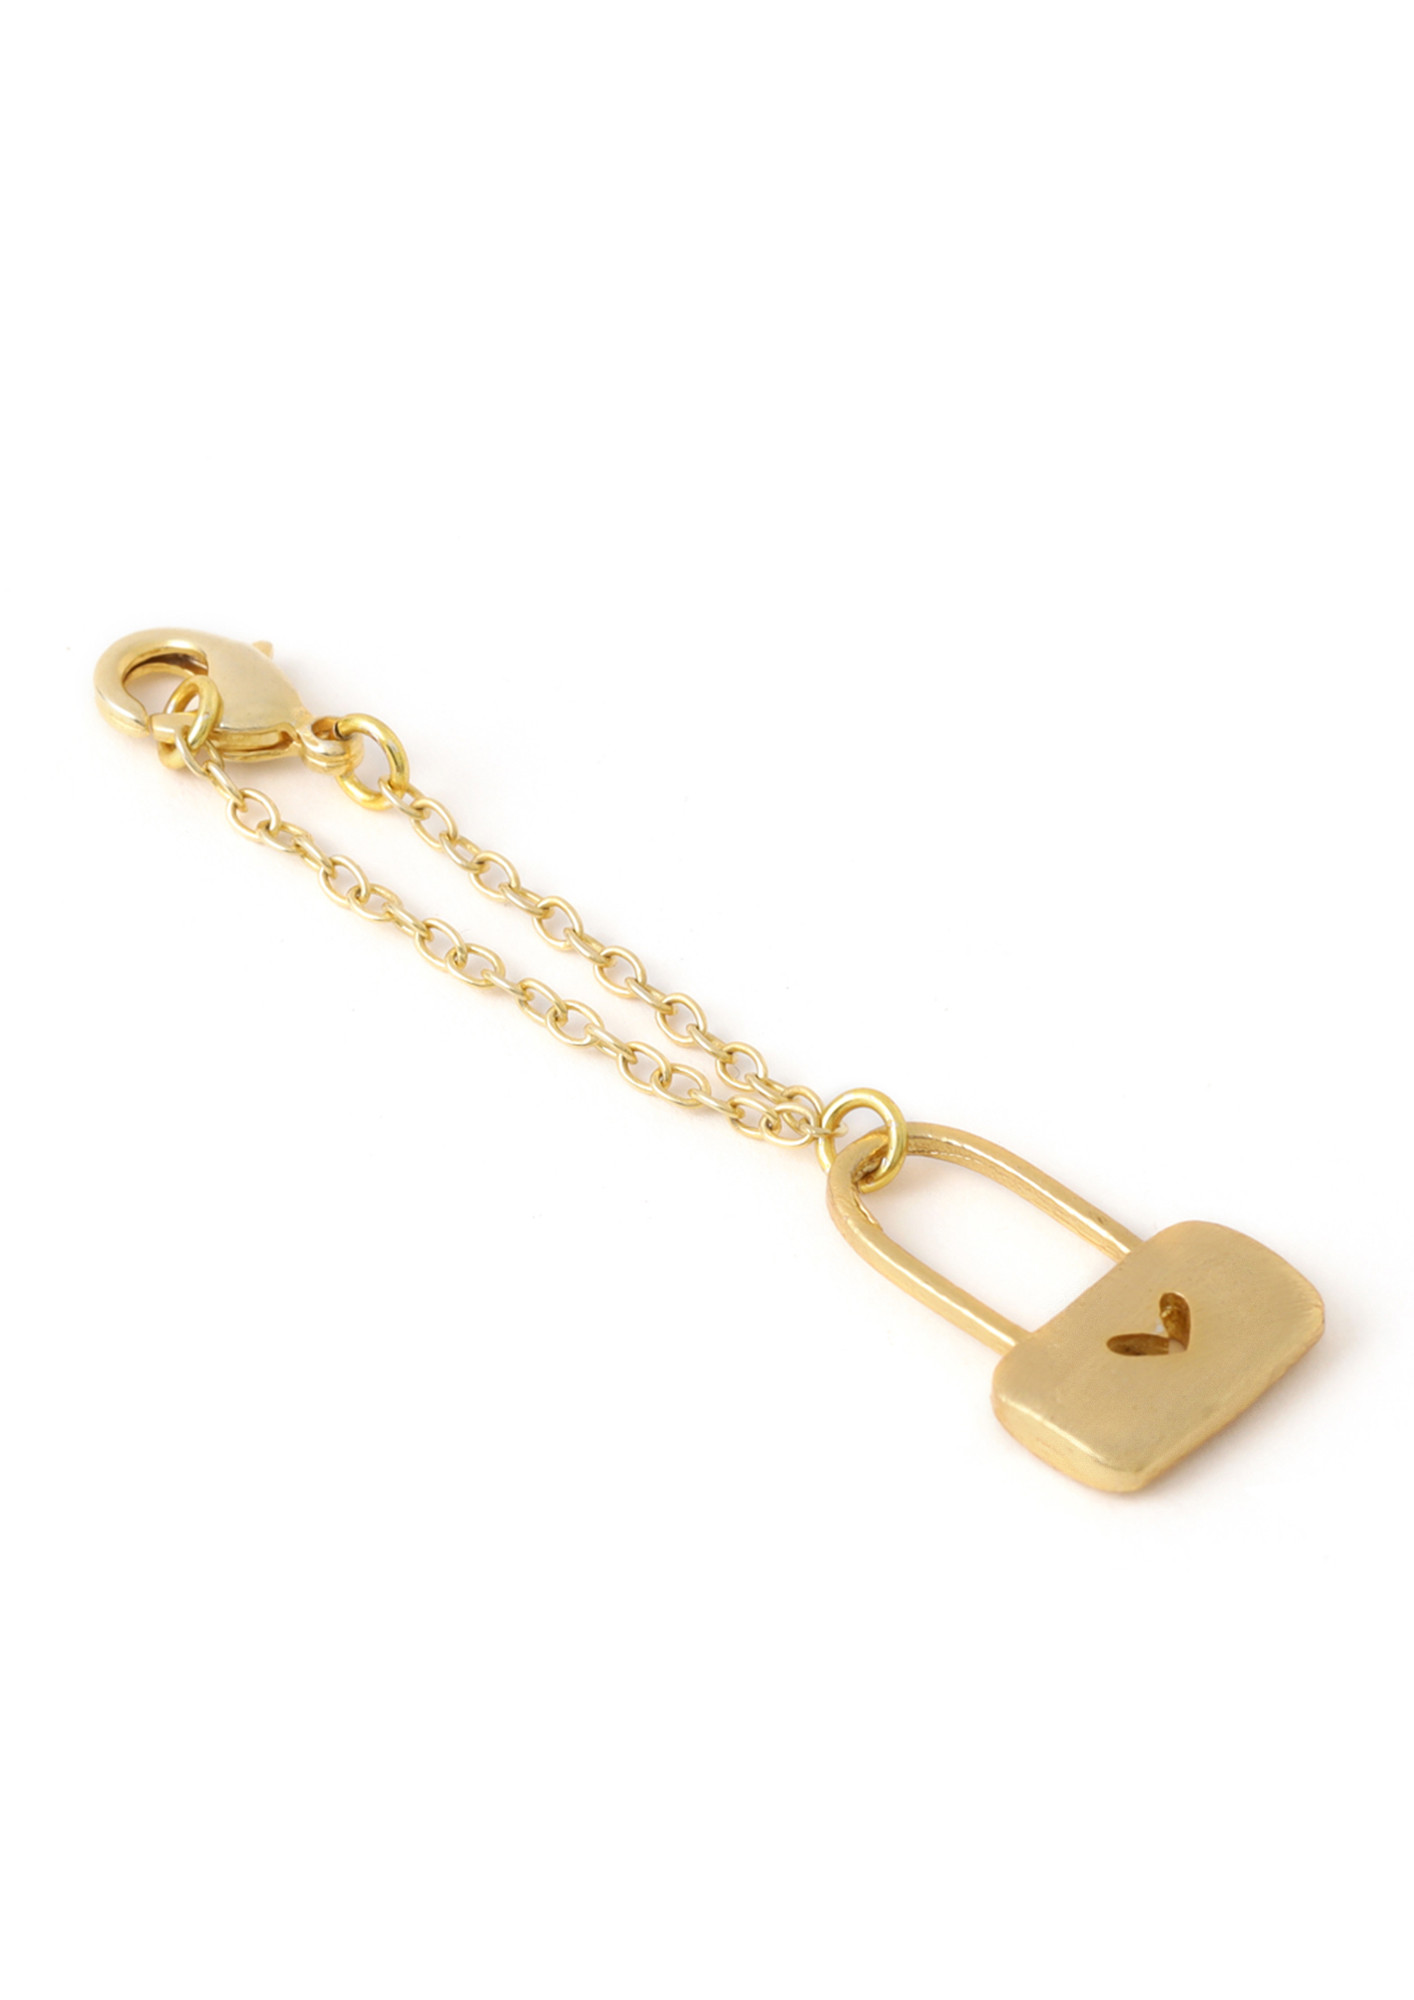 Buy Louis Vuitton Charm Online In India -  India